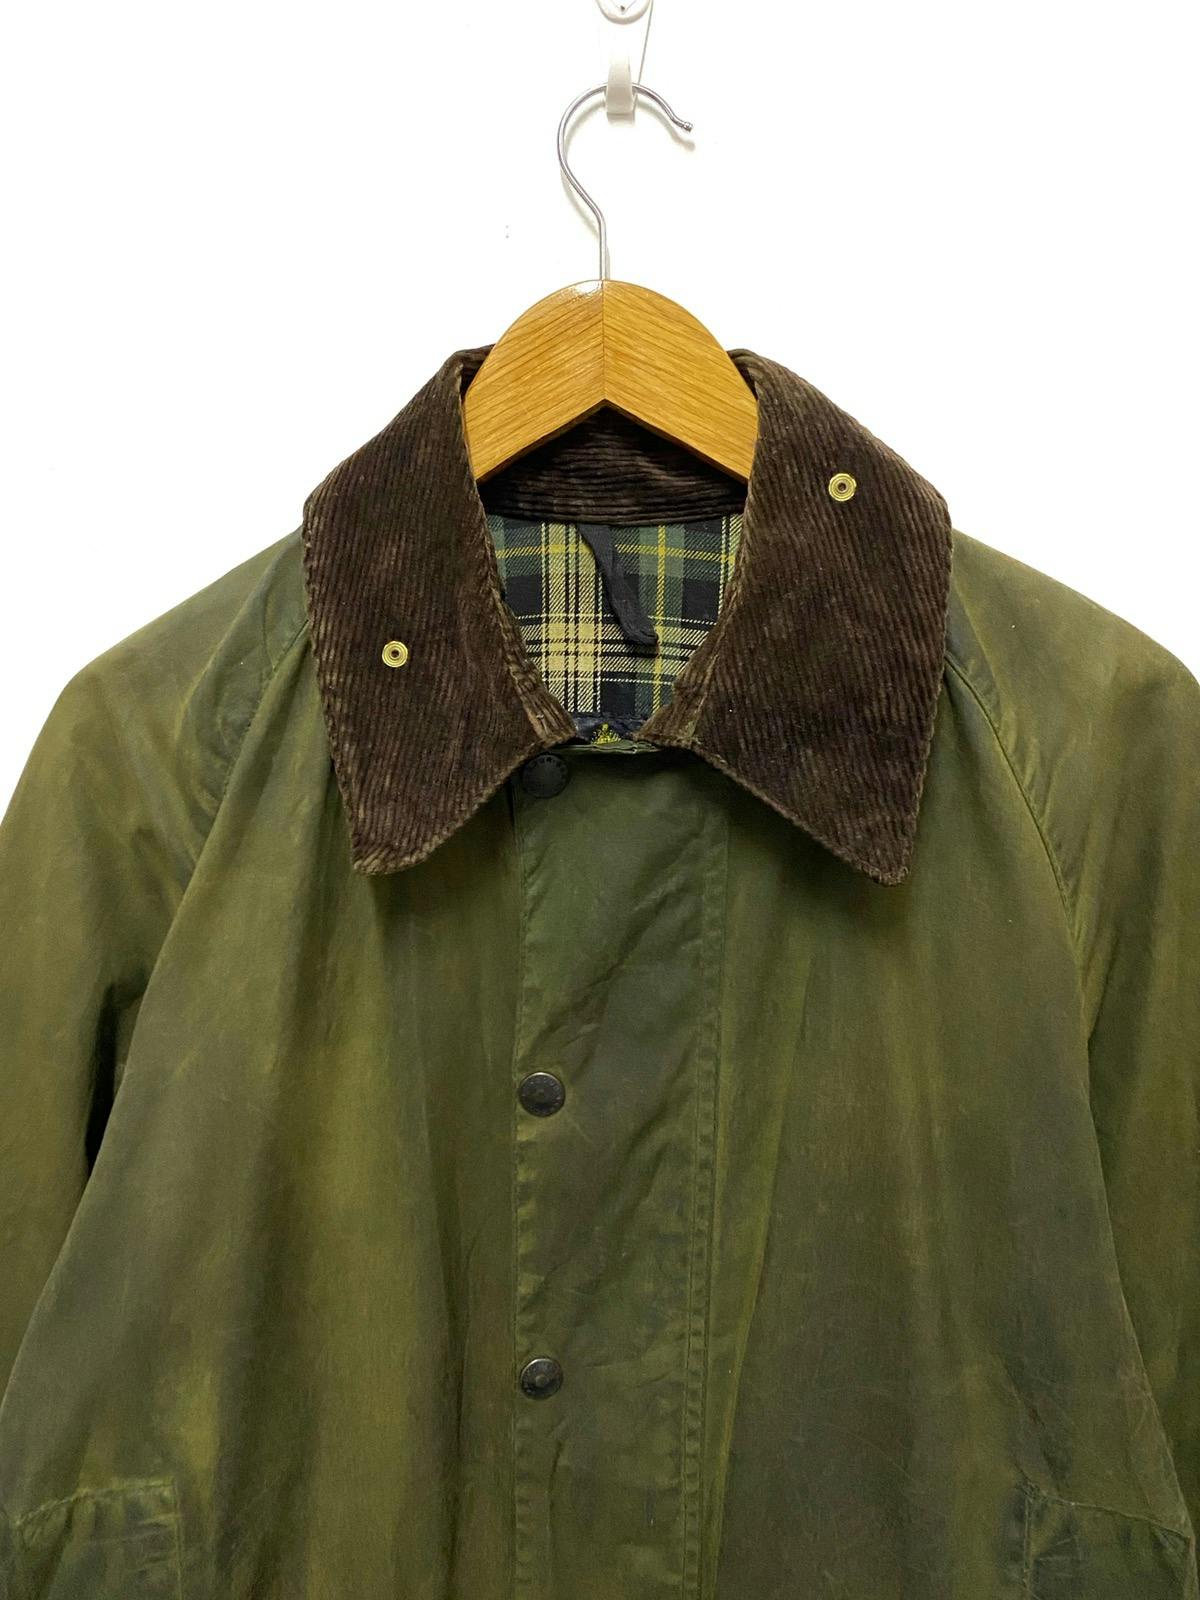 Vintage Barbour A150 Beaufort Wax Jacket Made in England - 2